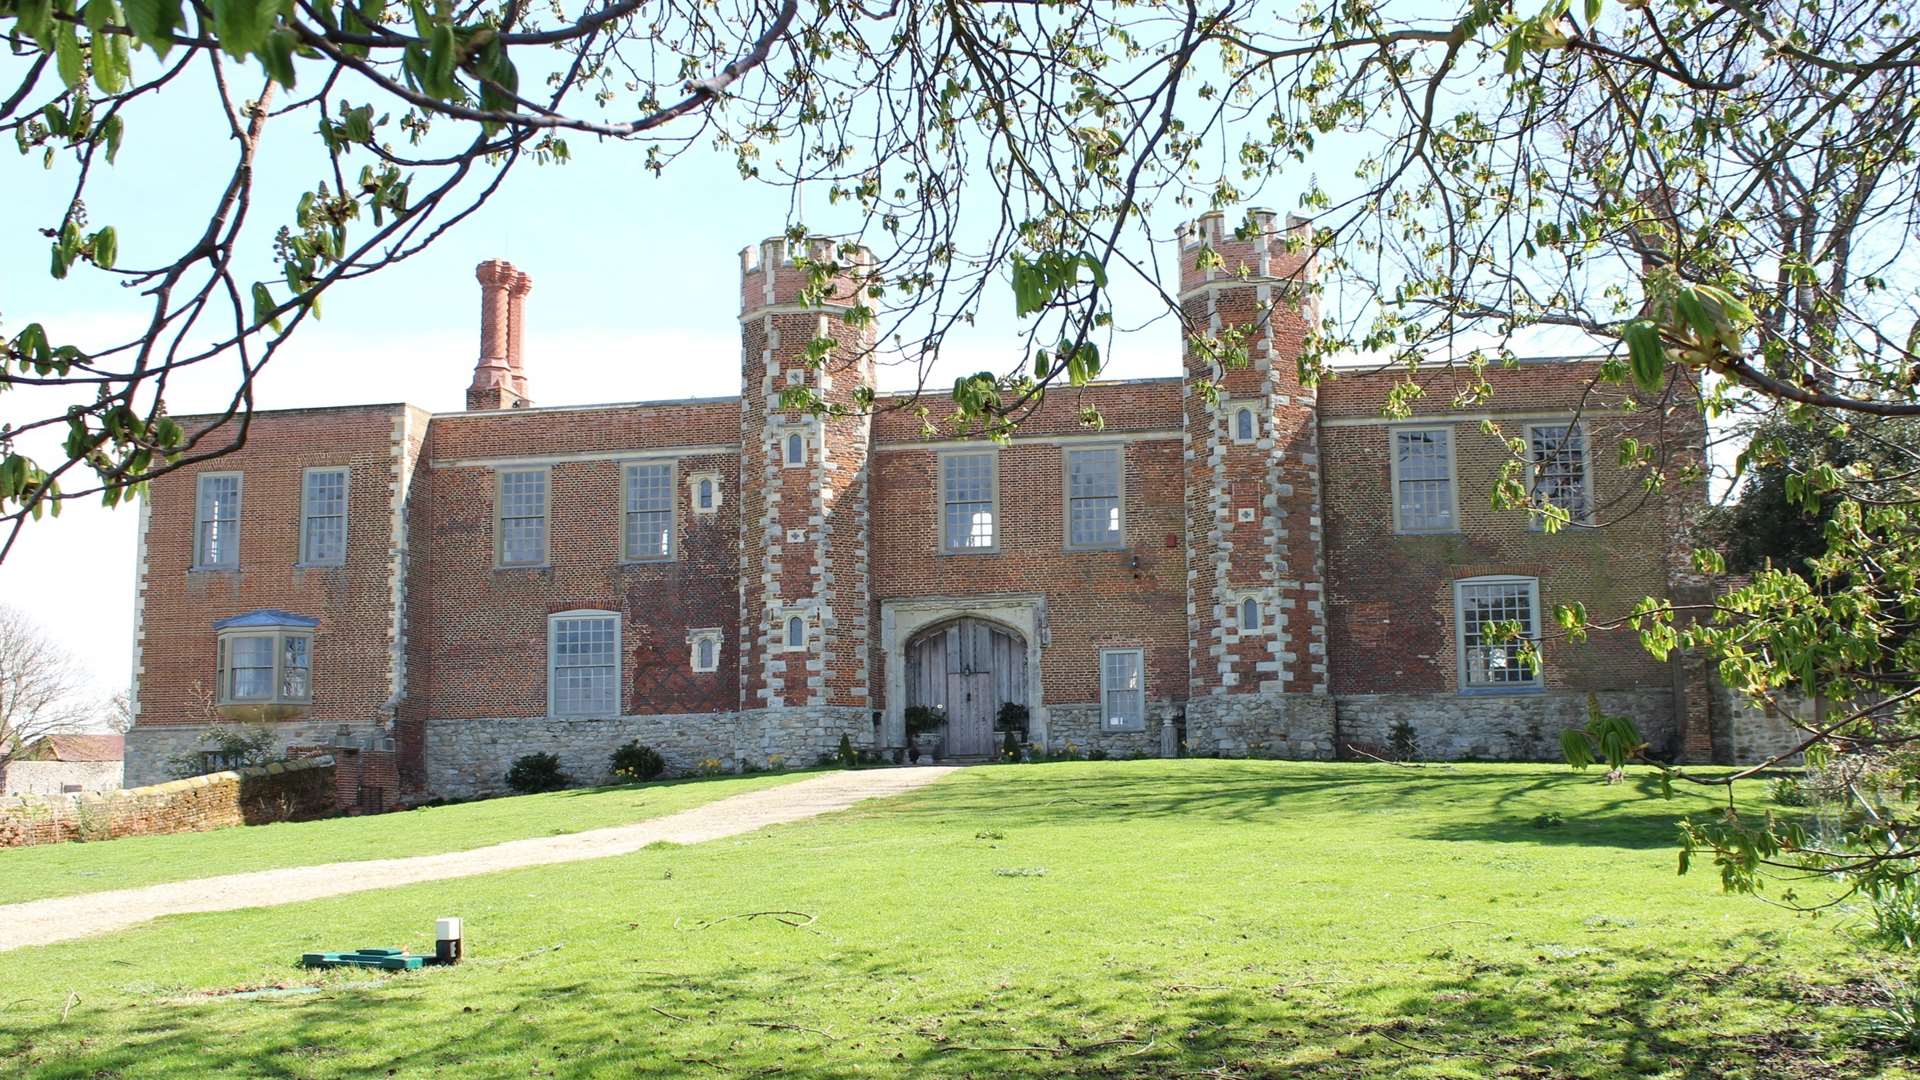 Shurland Hall at Eastchurch